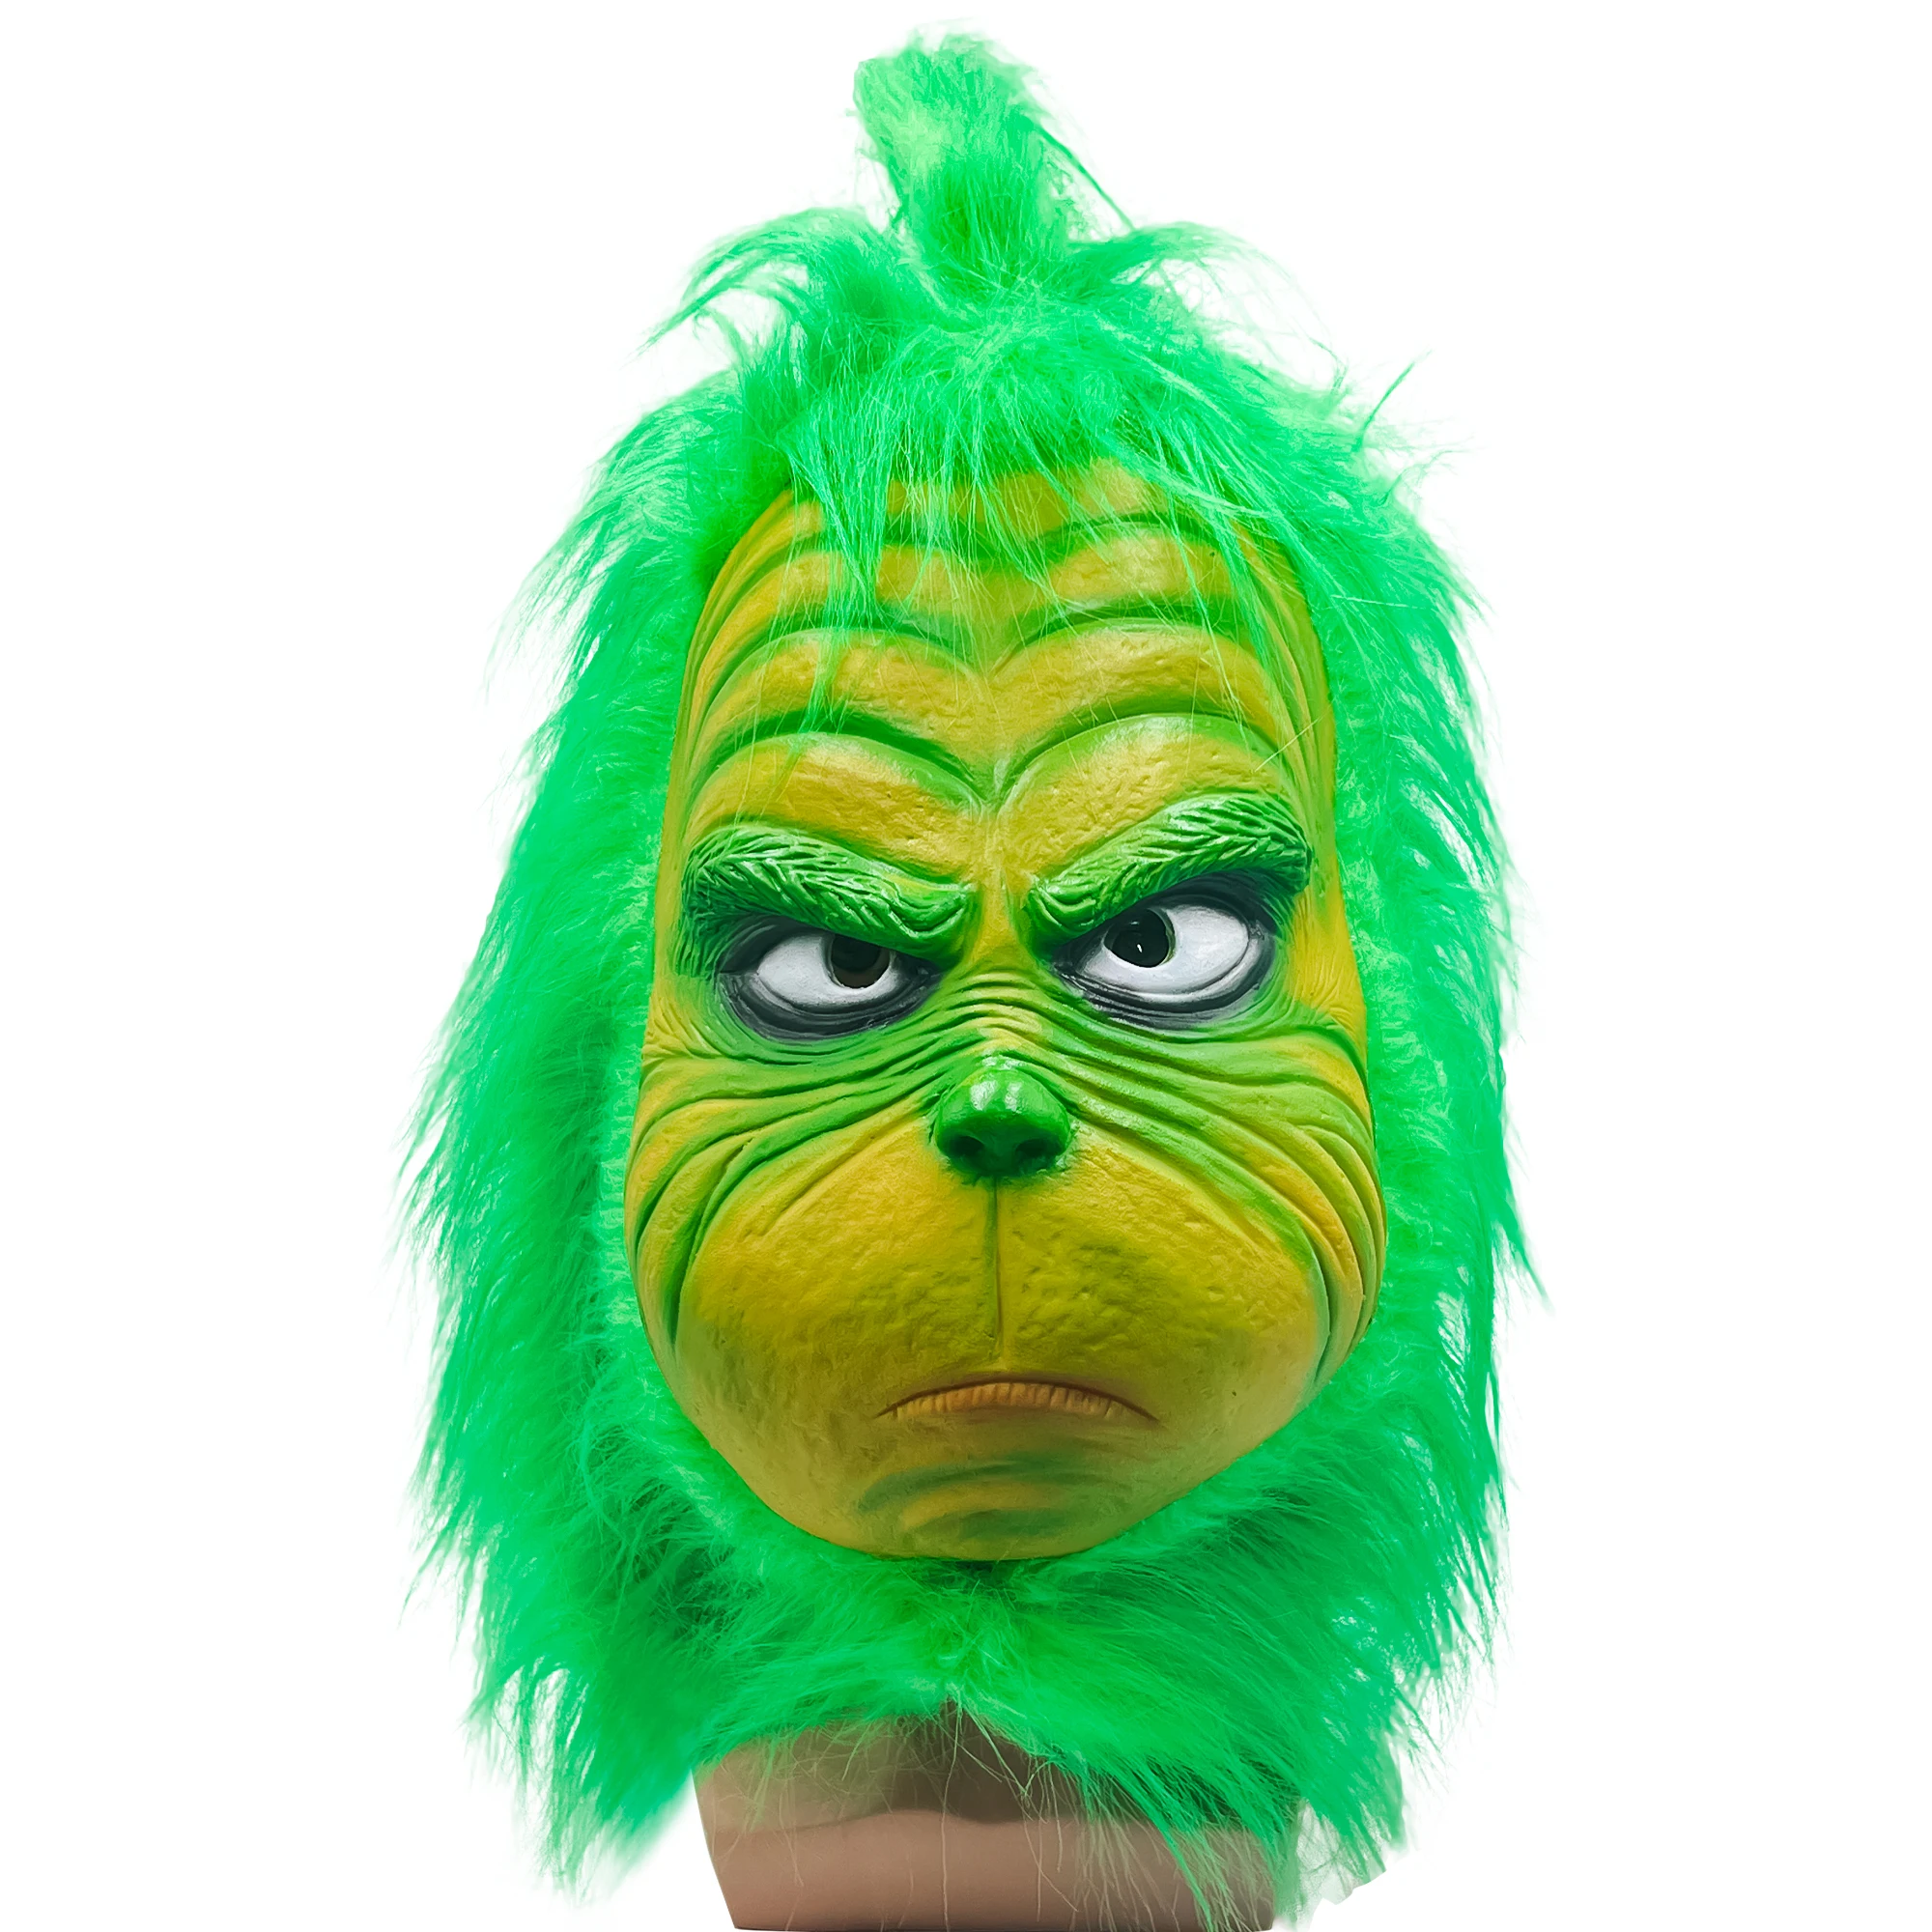 

Christmas Thief Geek Mask Cosplay Green Monster Santa Latex Helmet with Hat Halloween Carnival party costume props